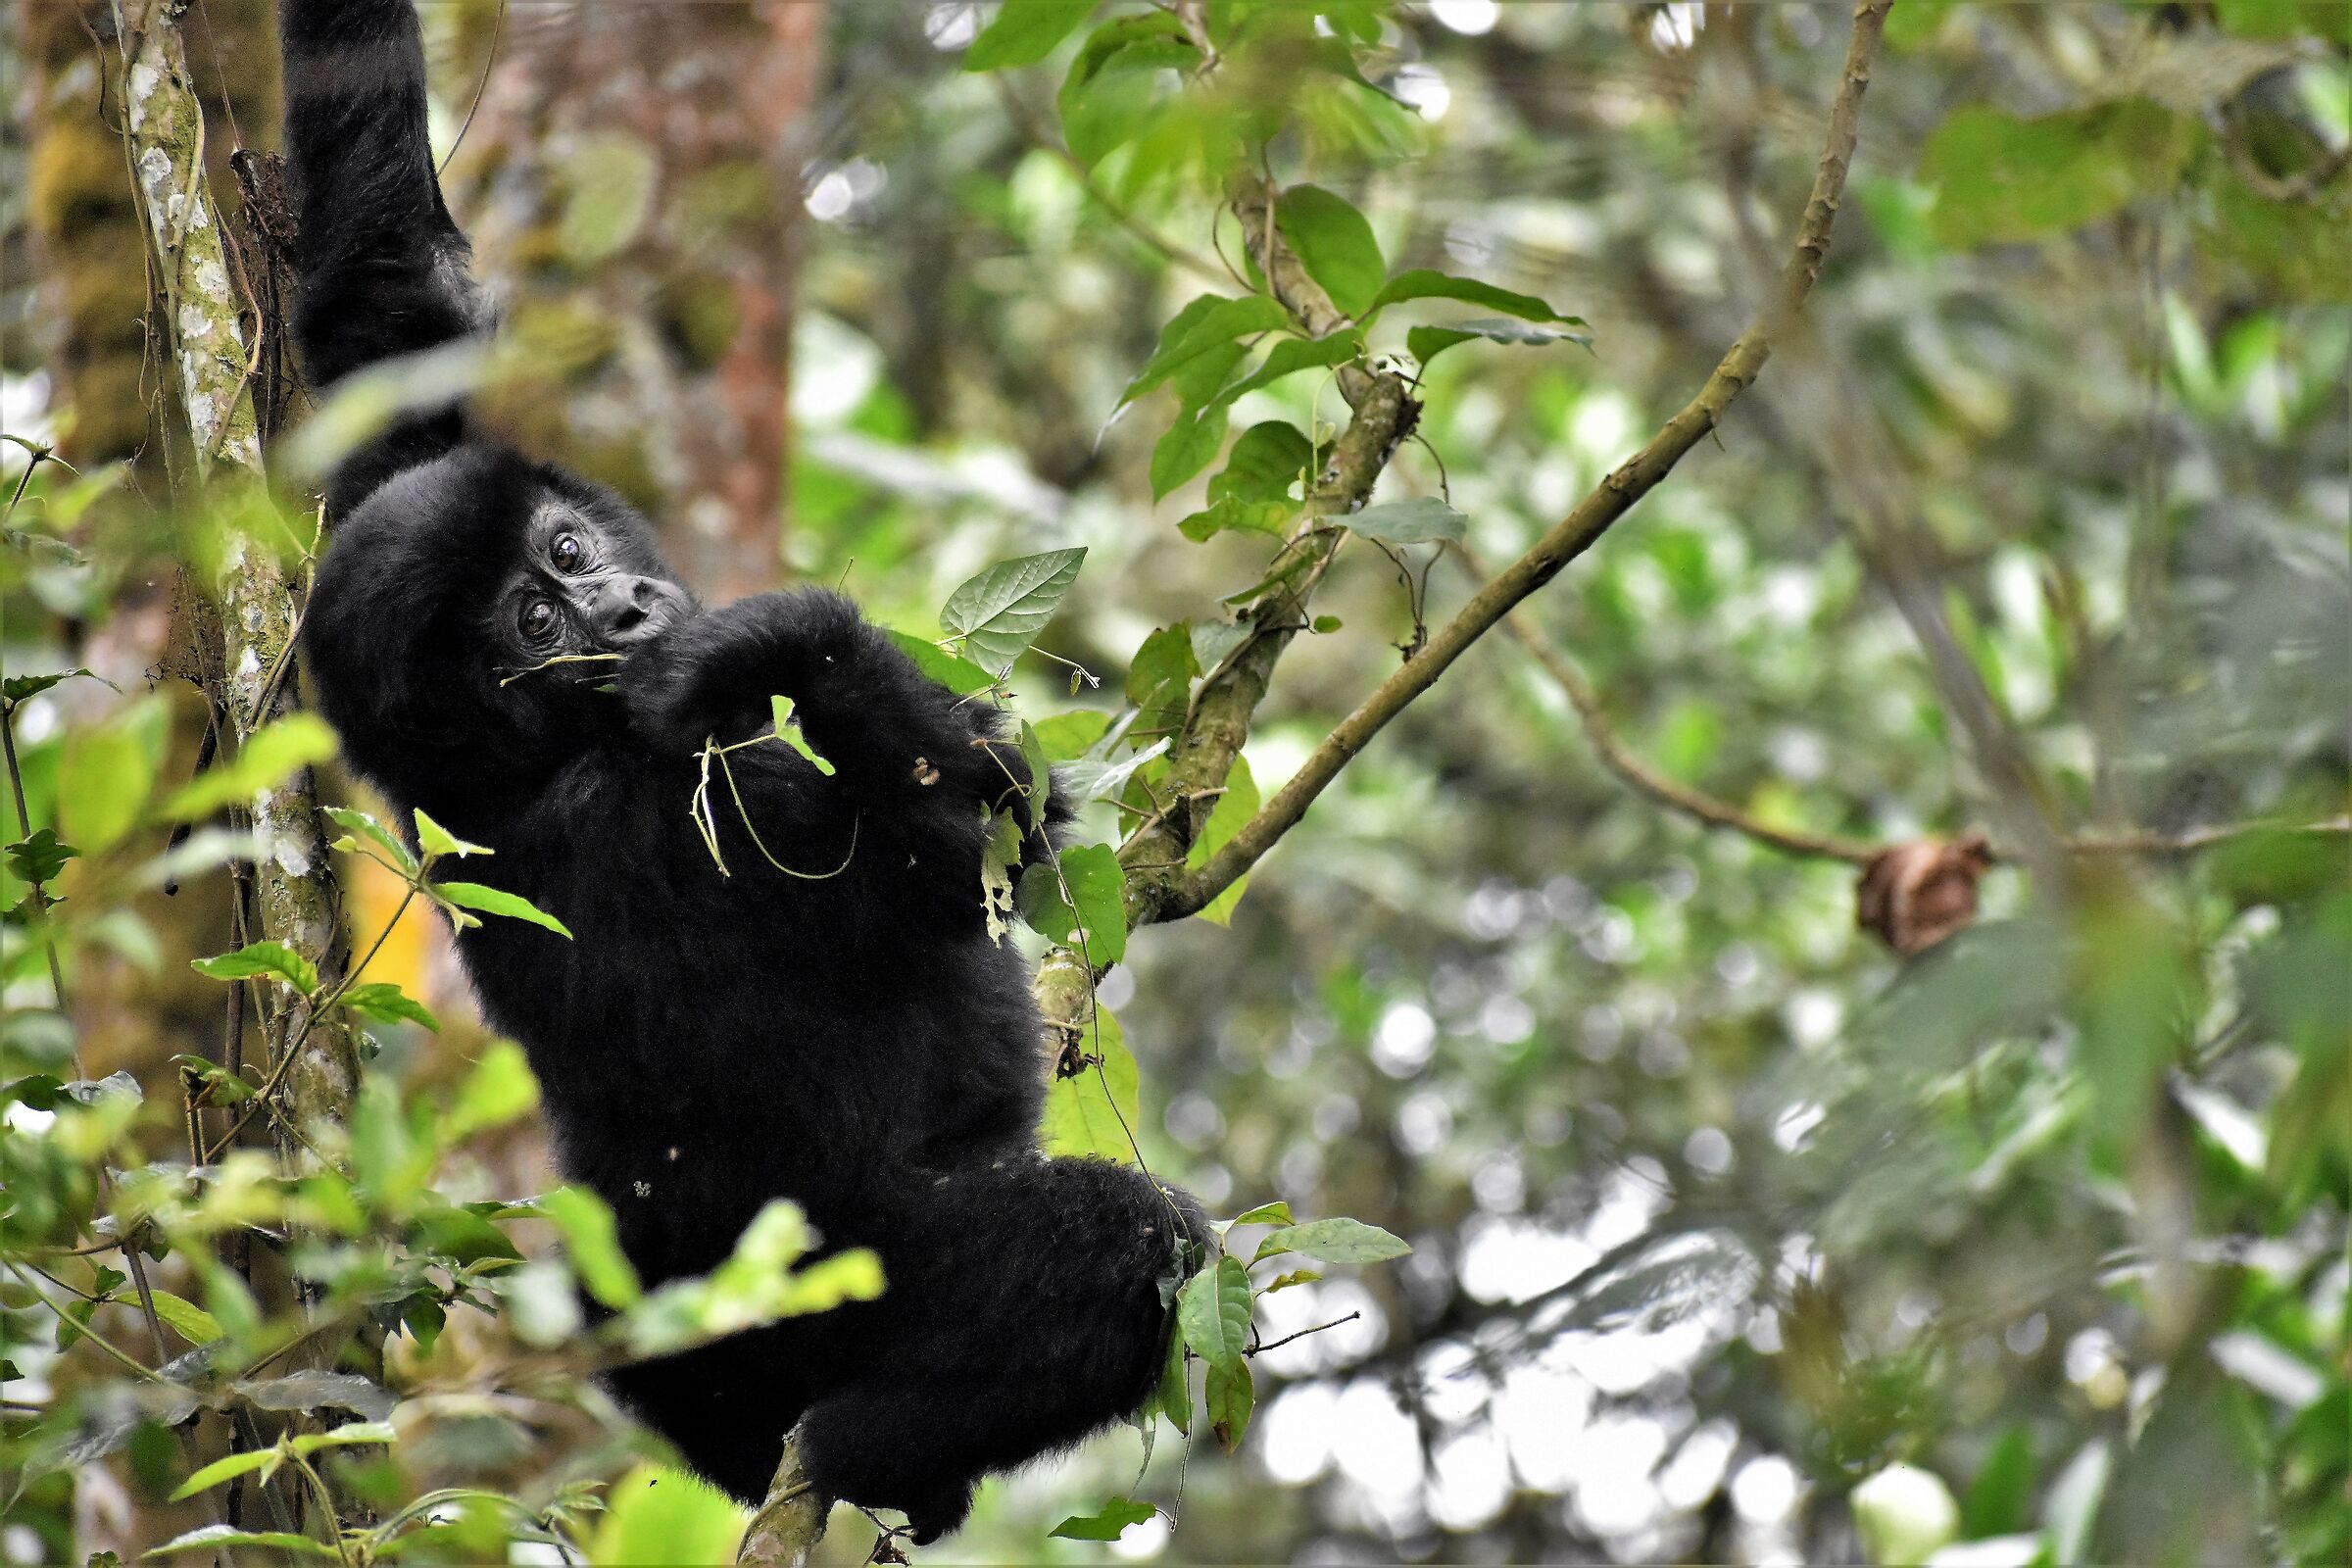 The first encounter with mountain gorillas!...